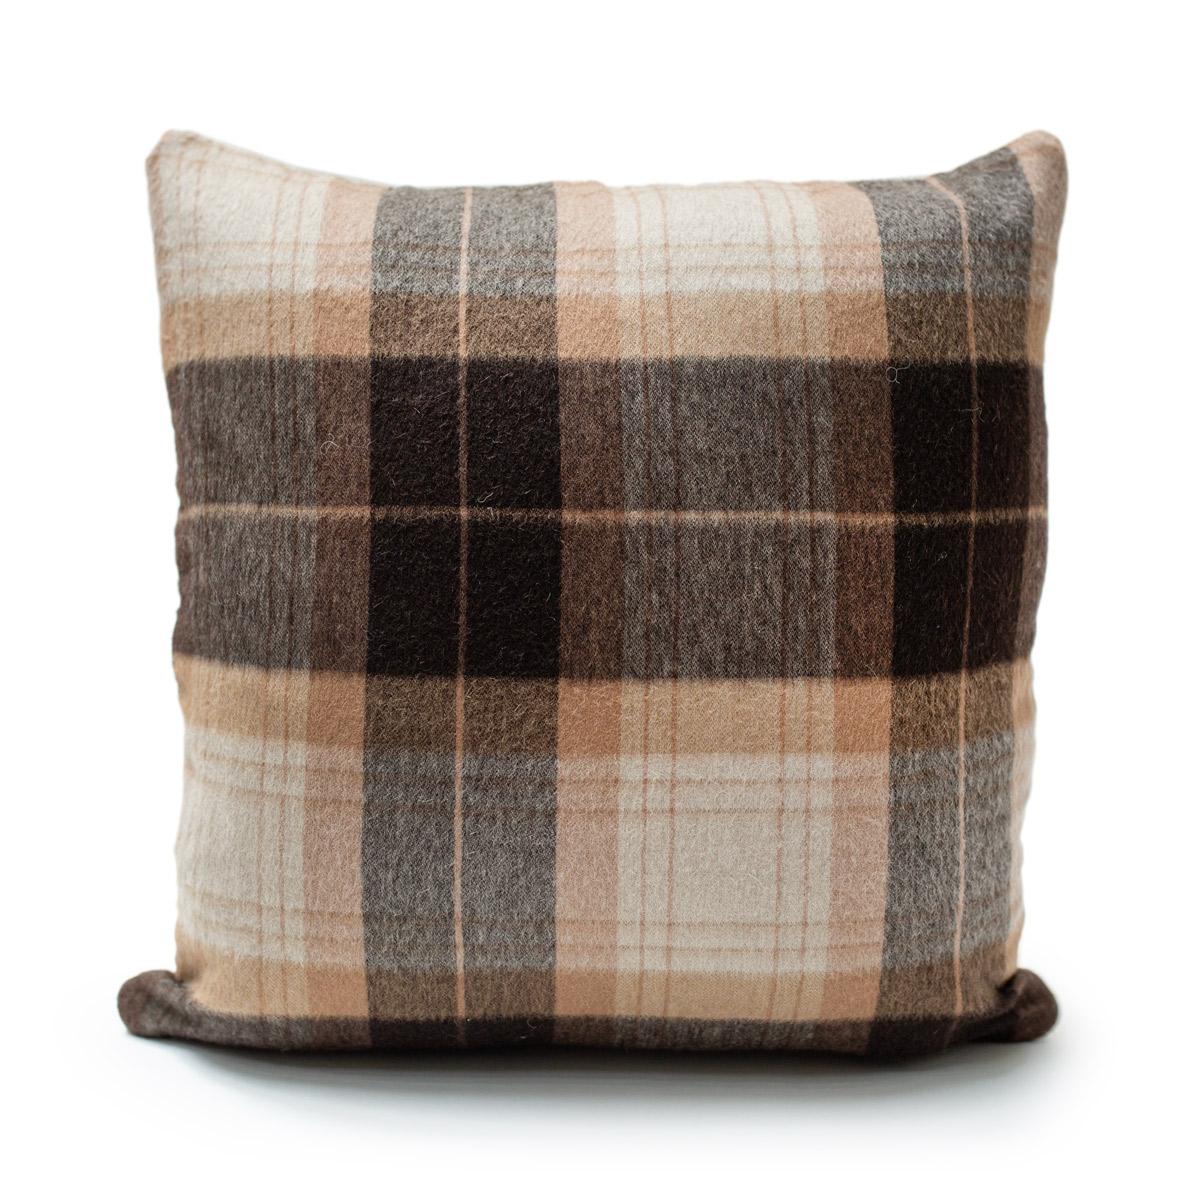 Pillow front in hand-painted, Tahoe with Cream felted wool fabric by JG SWITZER, backed with Sandra Jordan Prima Alpaca in Plaid Espresso Camel.

Pillow comes with a hidden zipper enclosure and ships with an insert. This is Dry Clean Only.